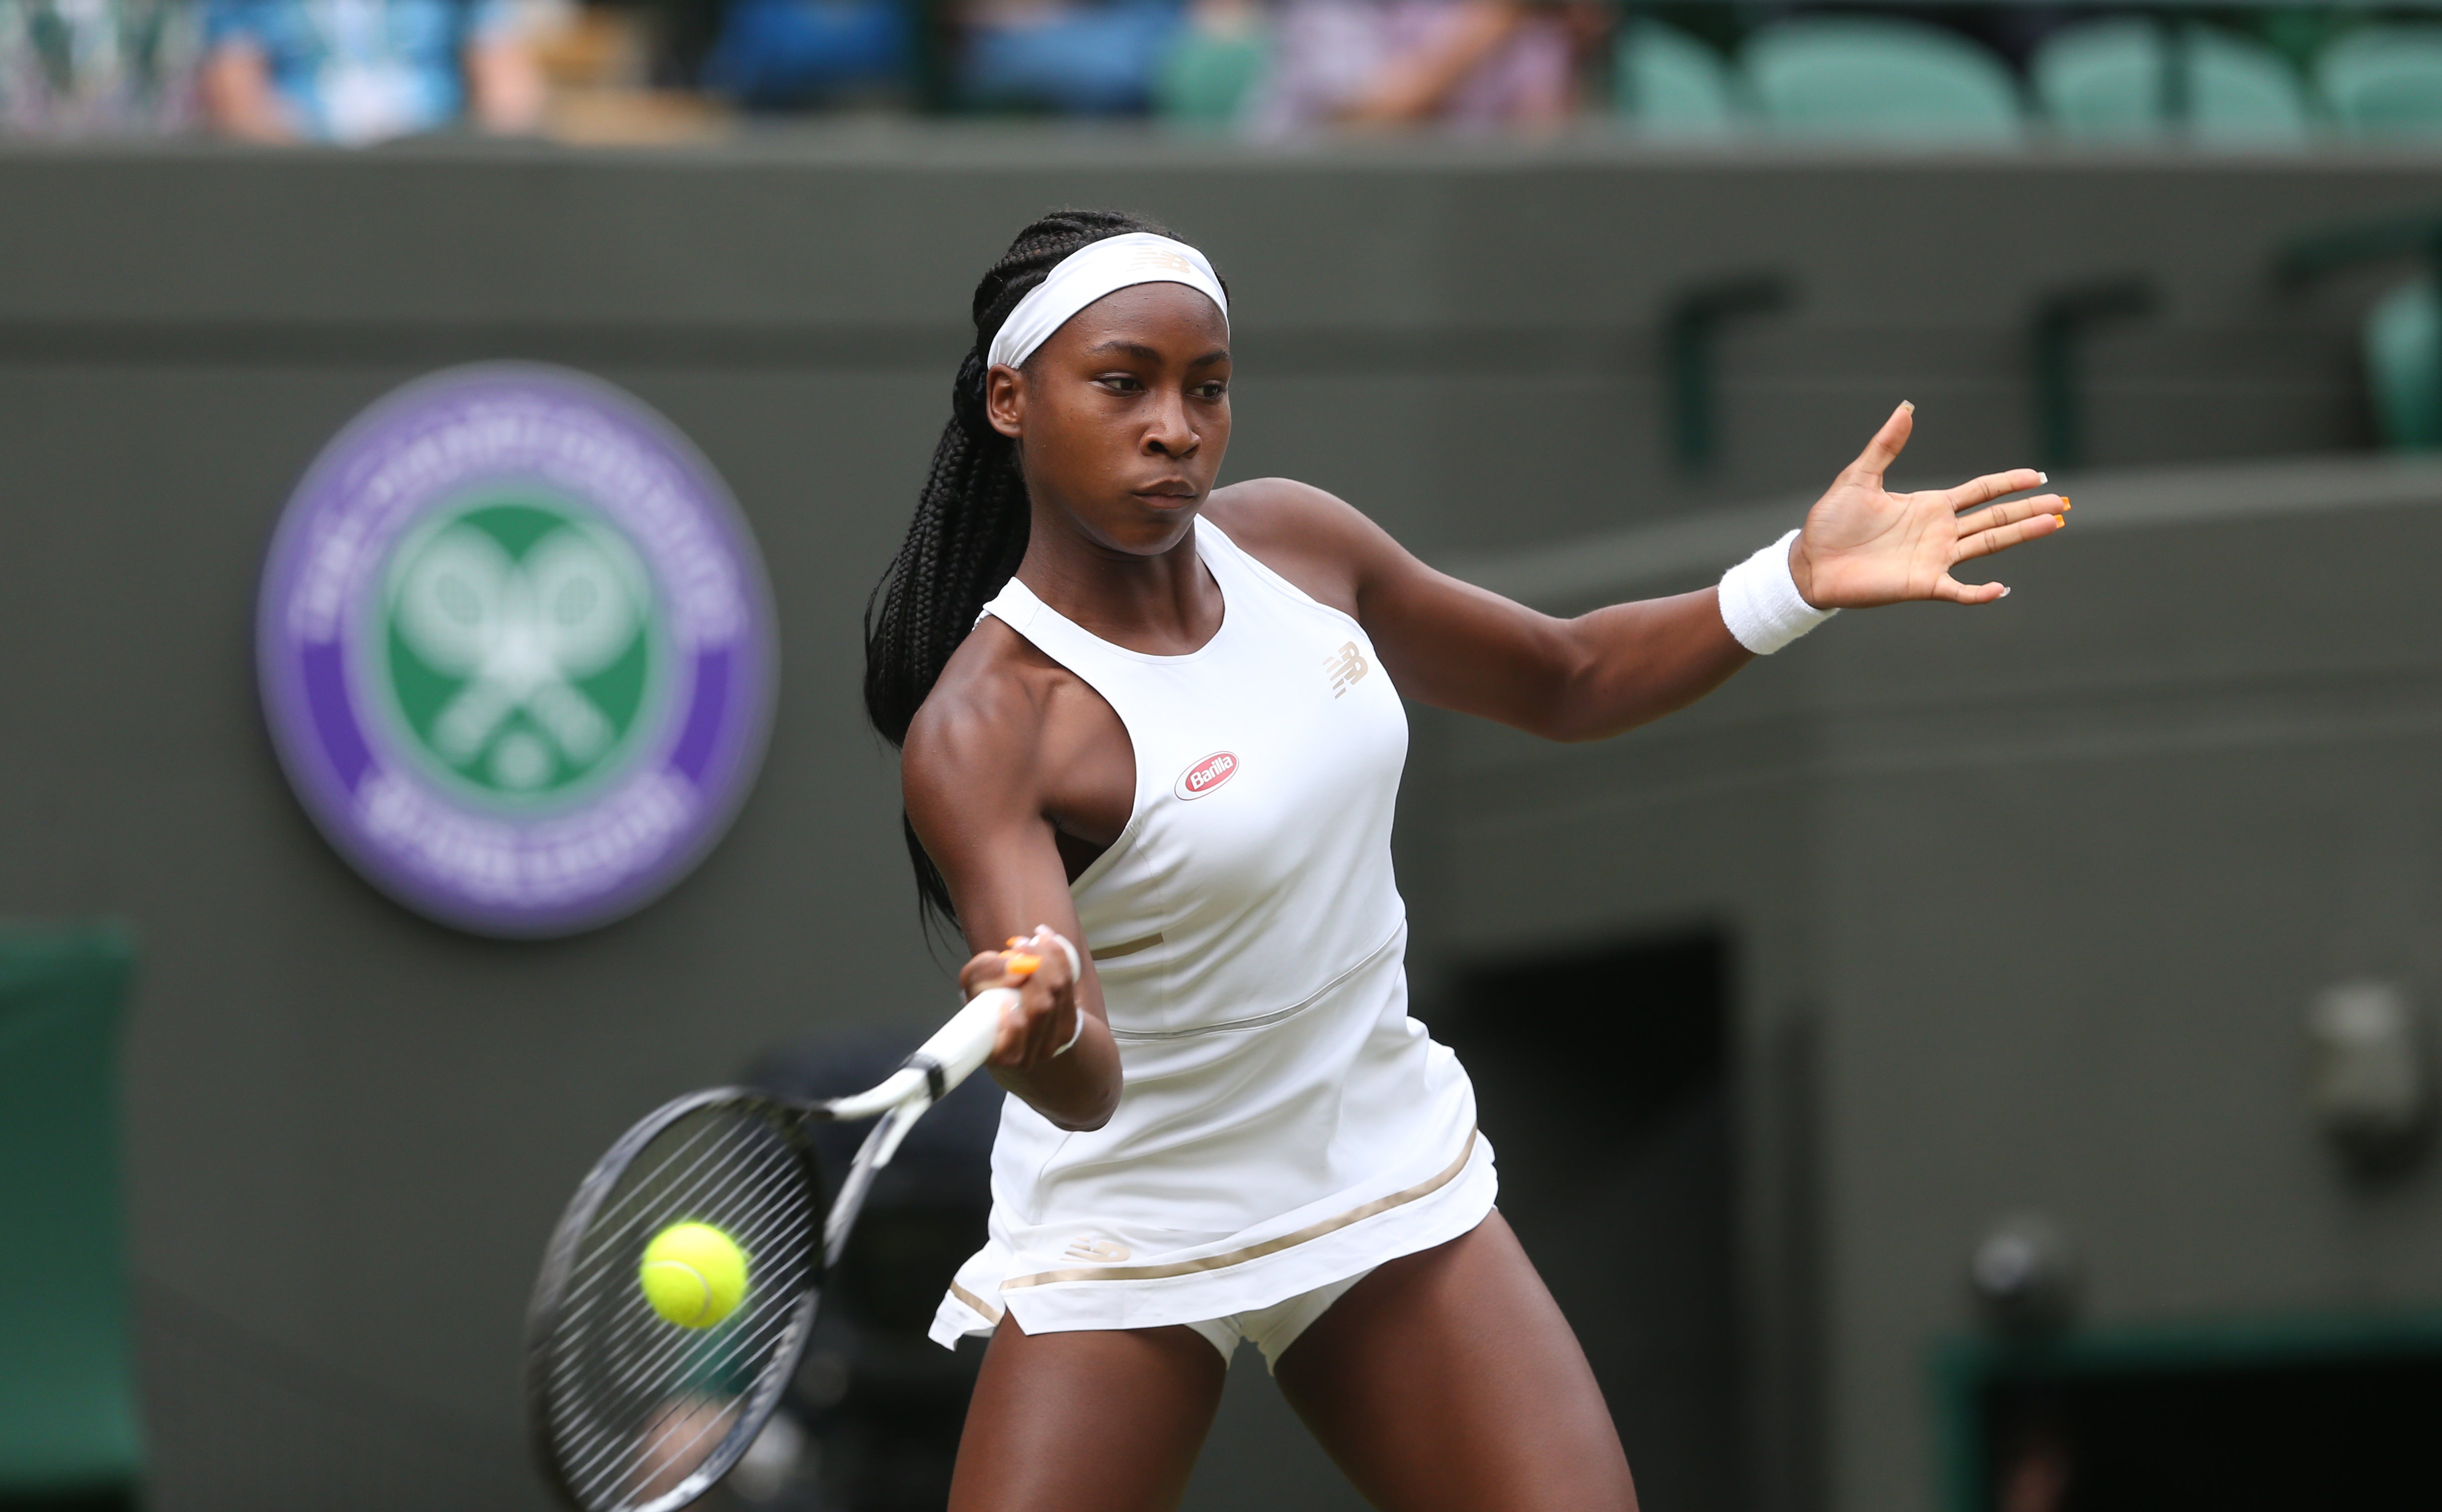 Cori Gauff, The Youngest Player To Qualify For Wimbledon, Defeats Venus Williams